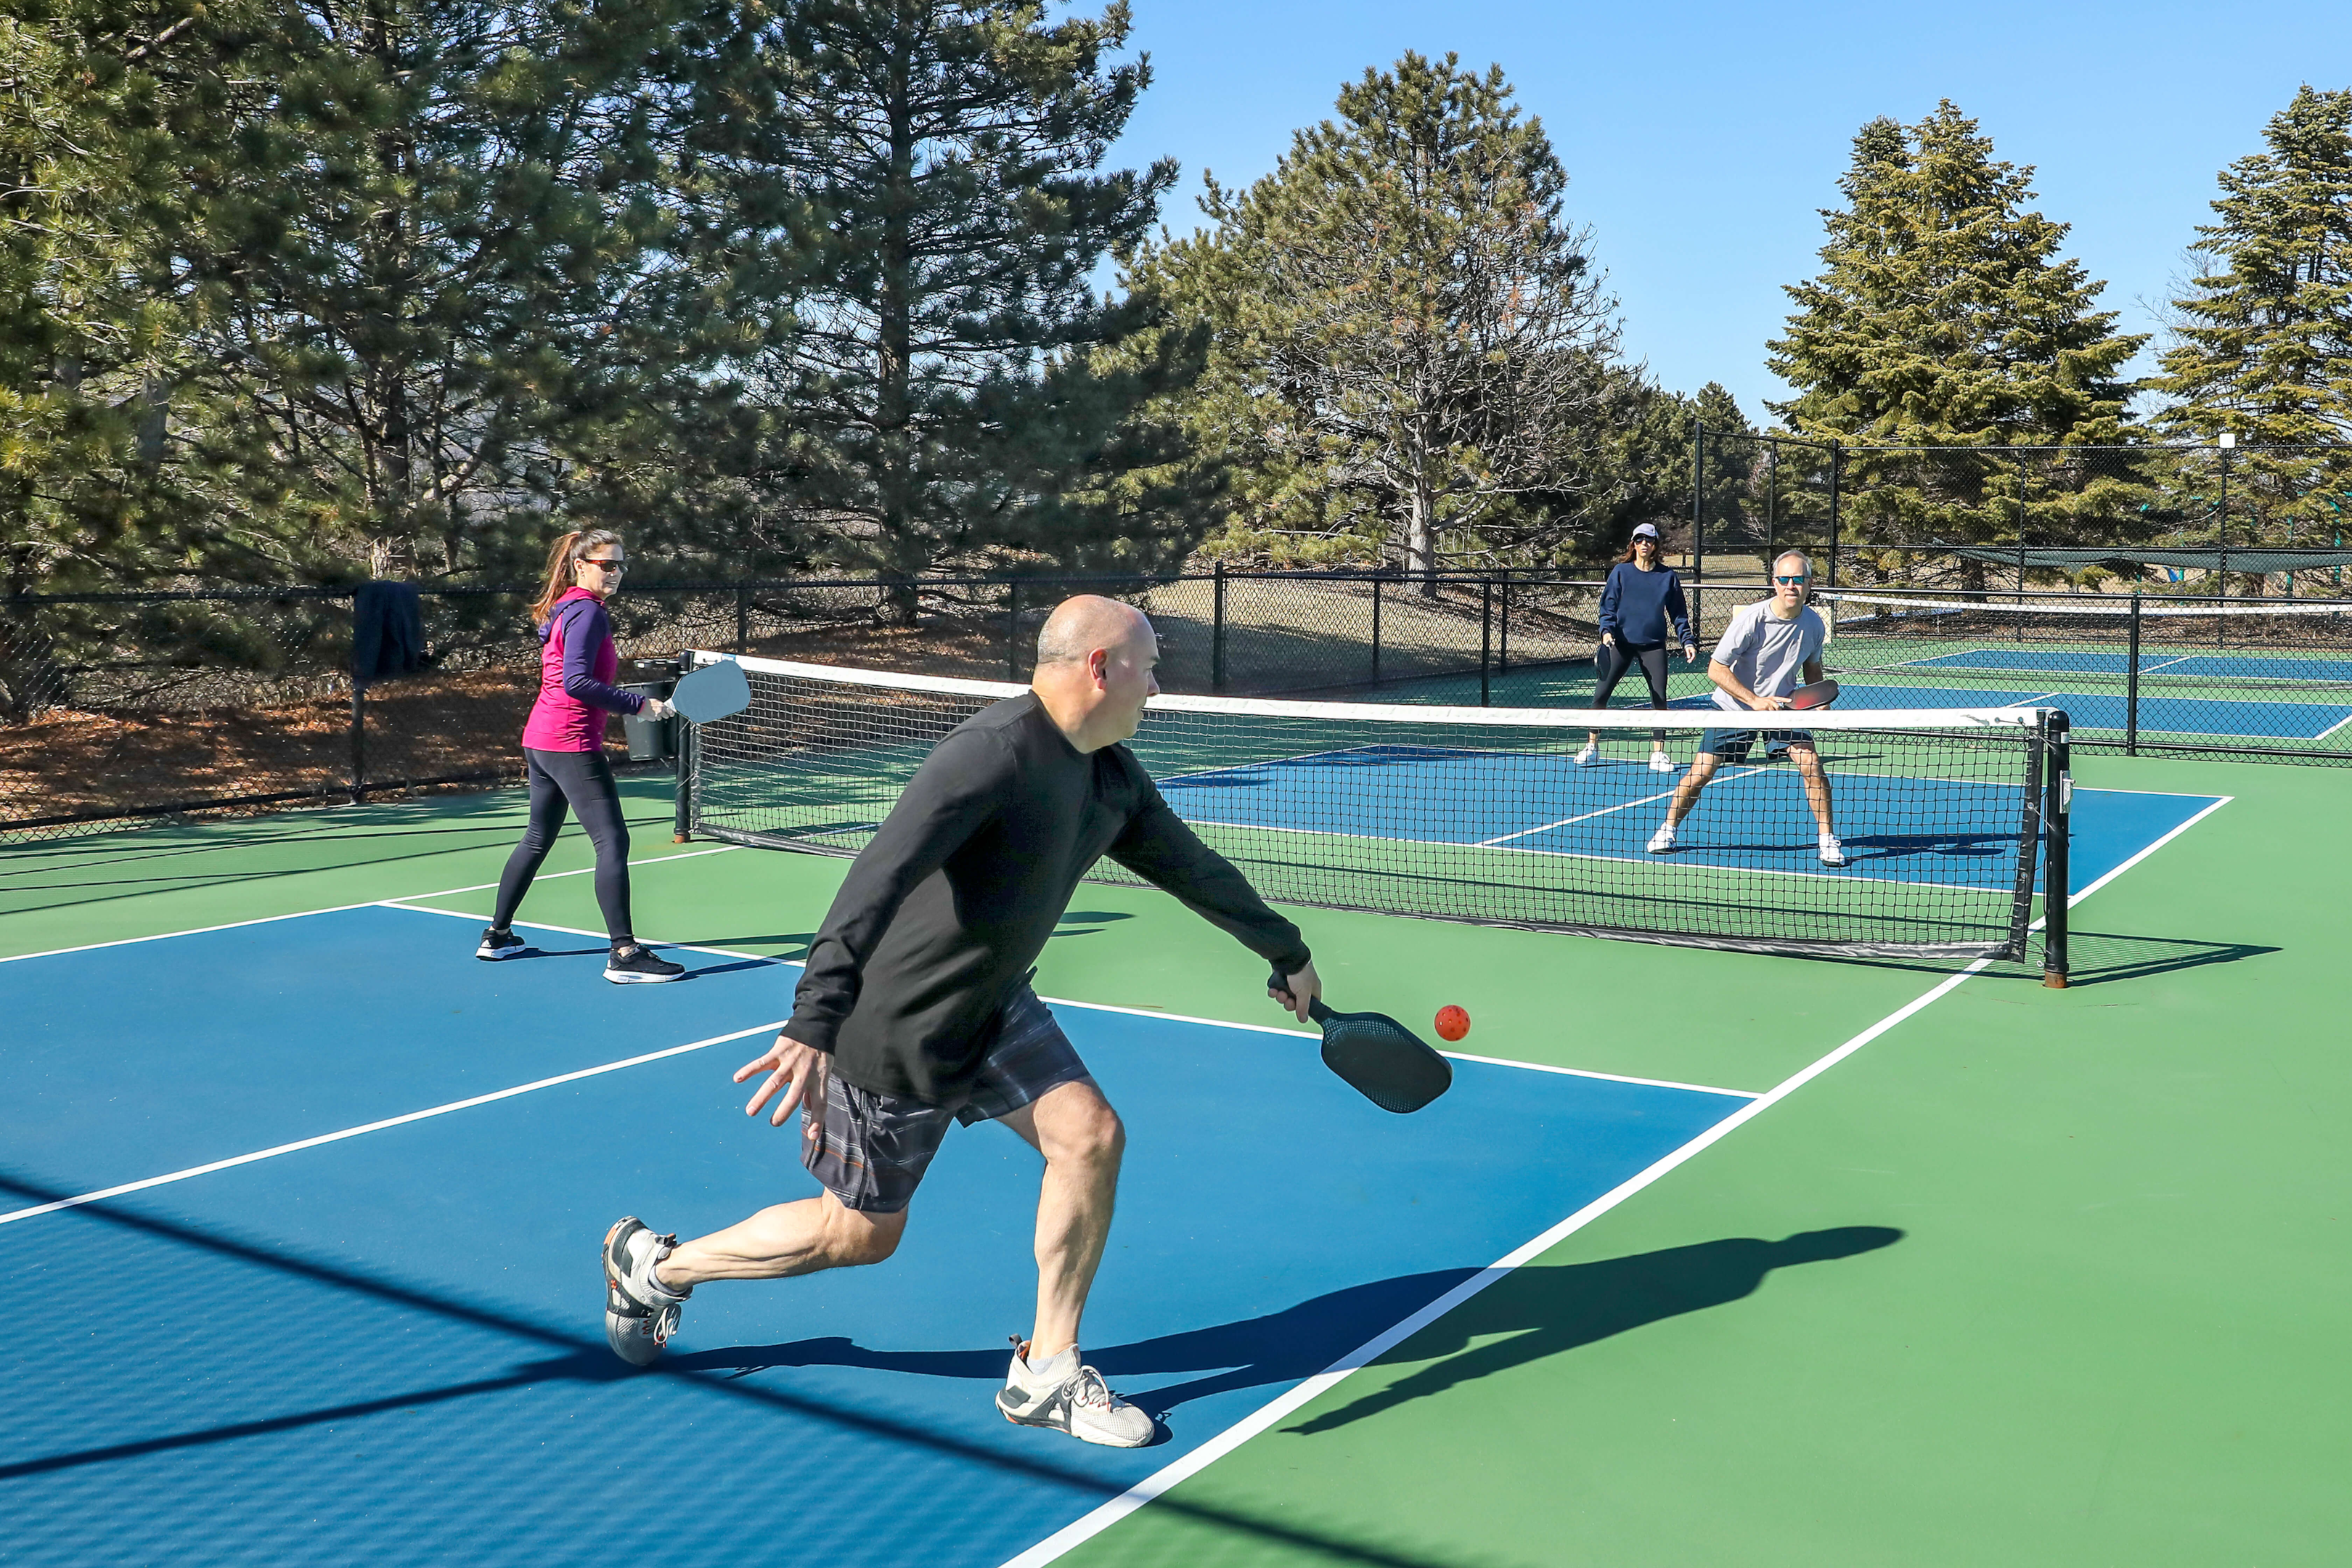 Pickleball game of two teams: The male player in black shirt is trying to hit the ball in his side of the court.